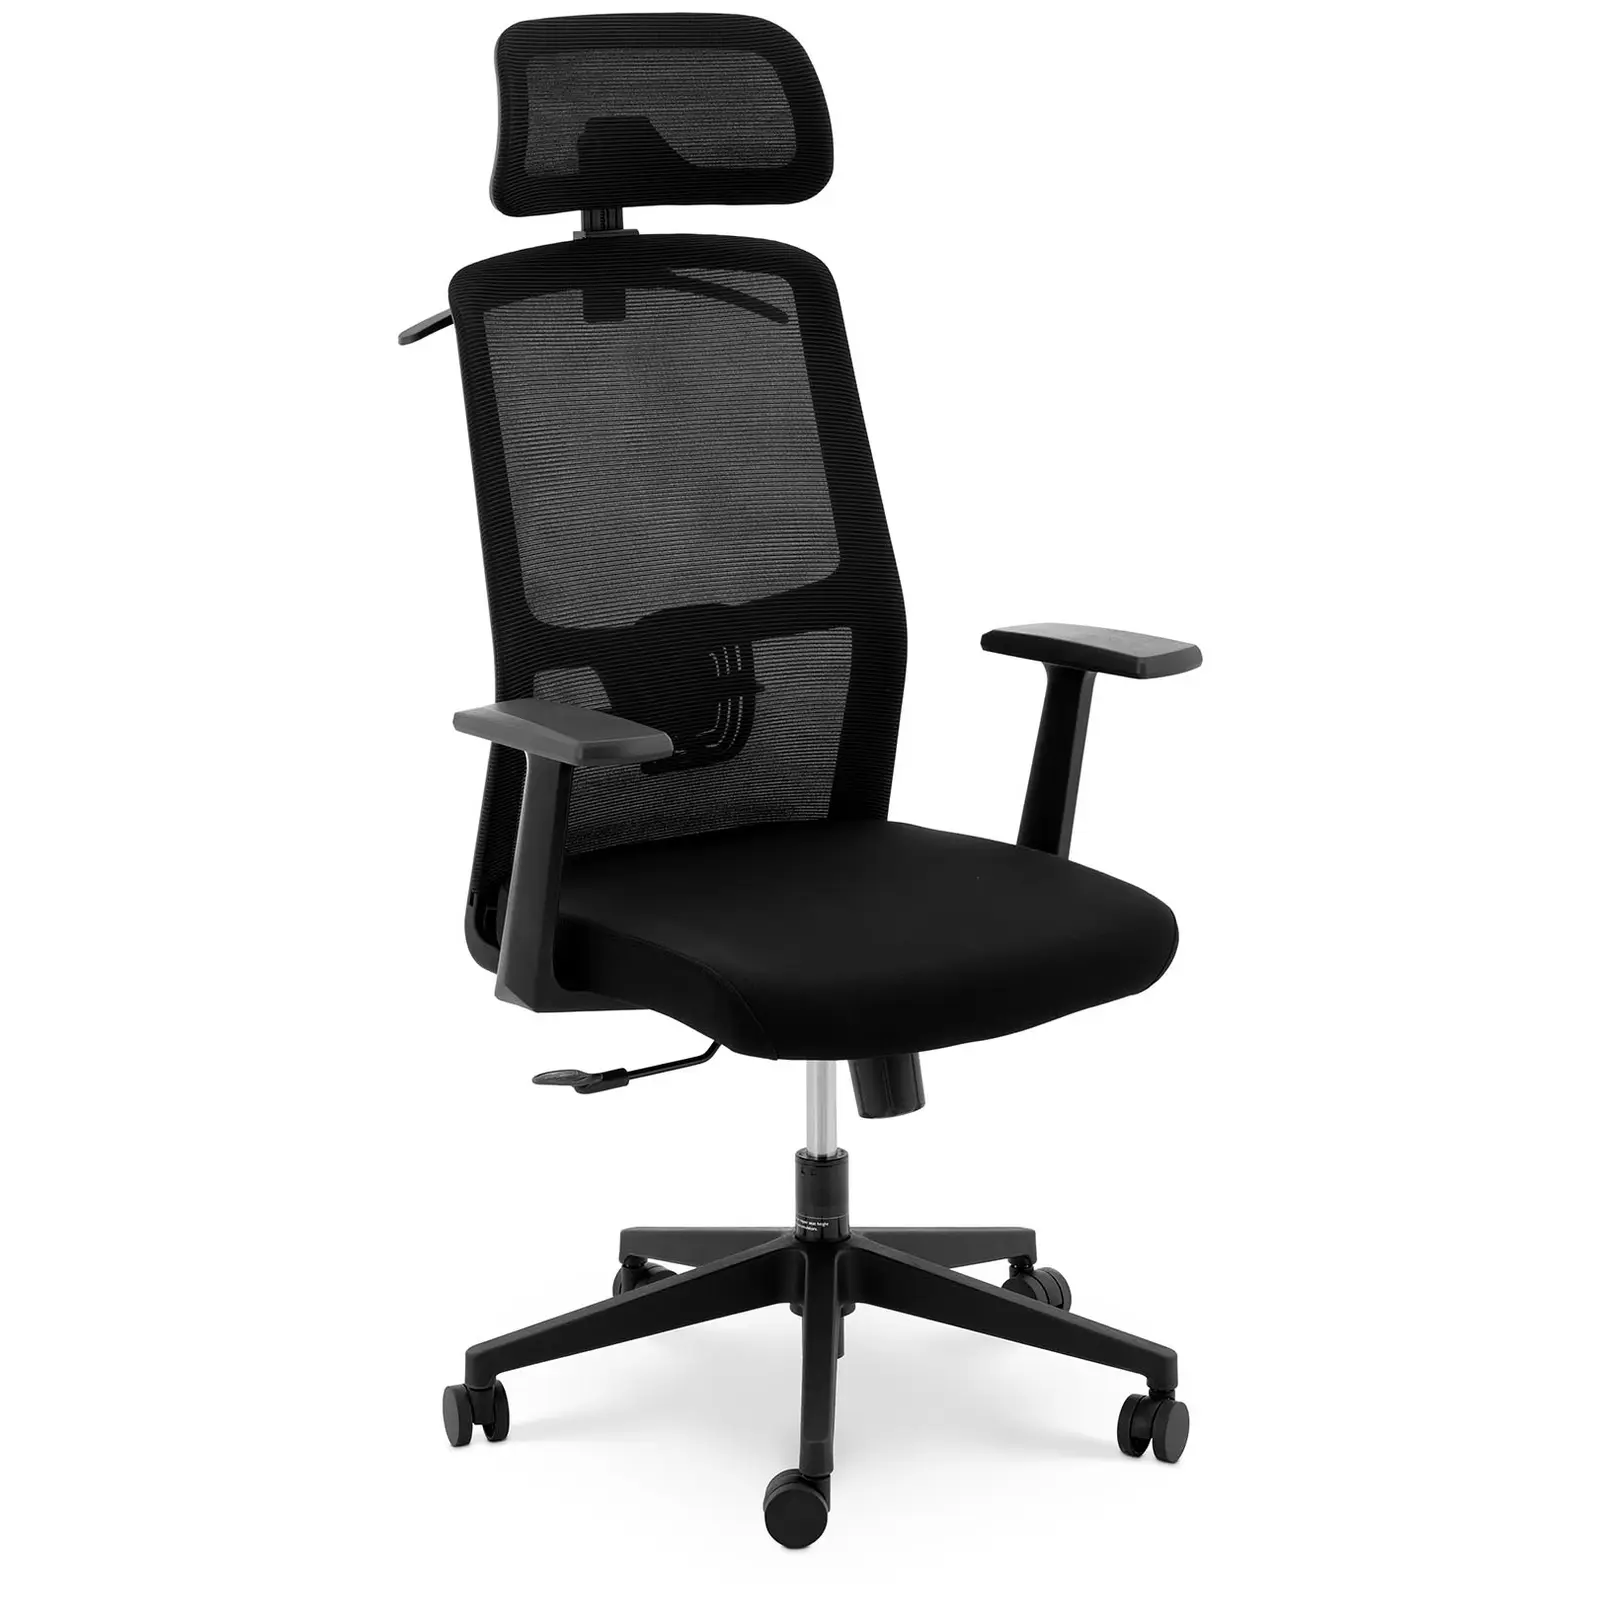 Office Chair - mesh back - headrest - 50 x 50.5 cm seat - up to 150 kg - black